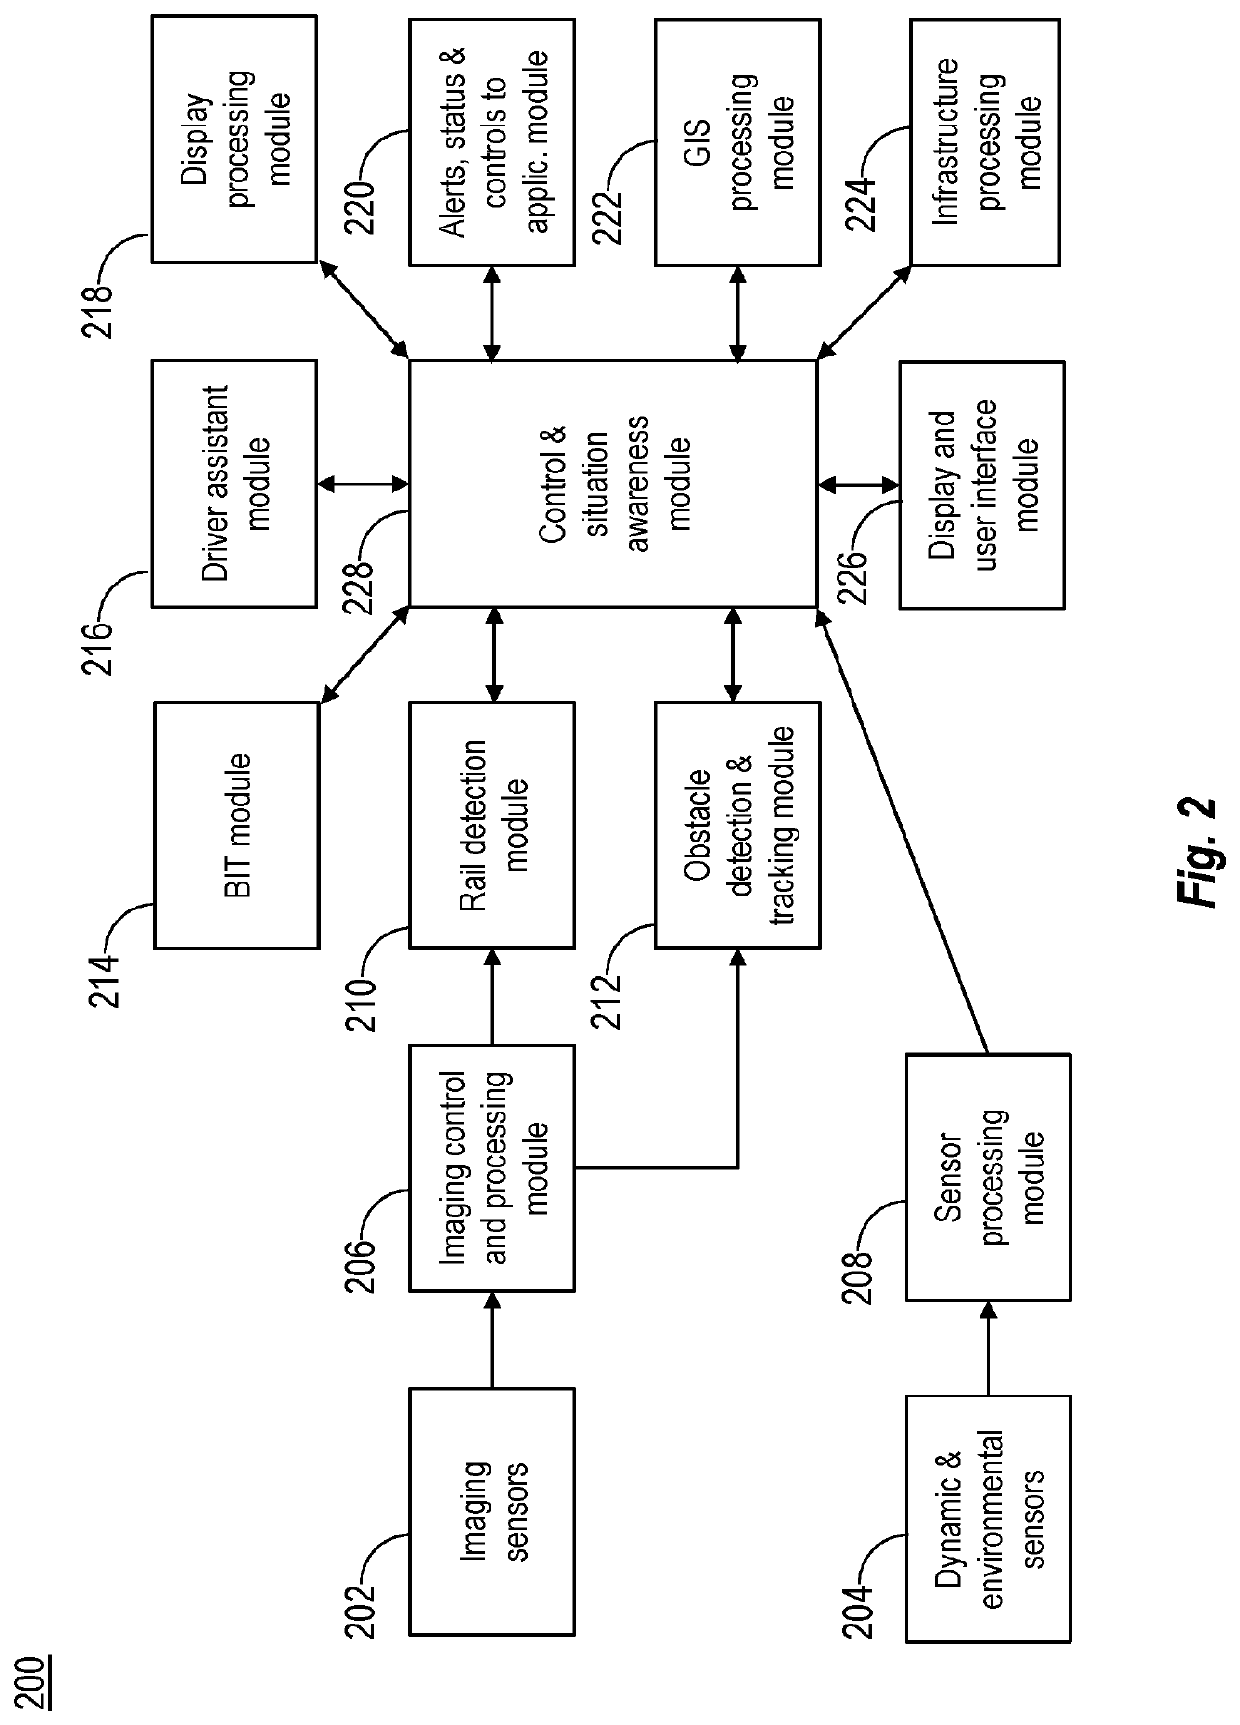 Method and system for railway obstacle detection based on rail segmentation